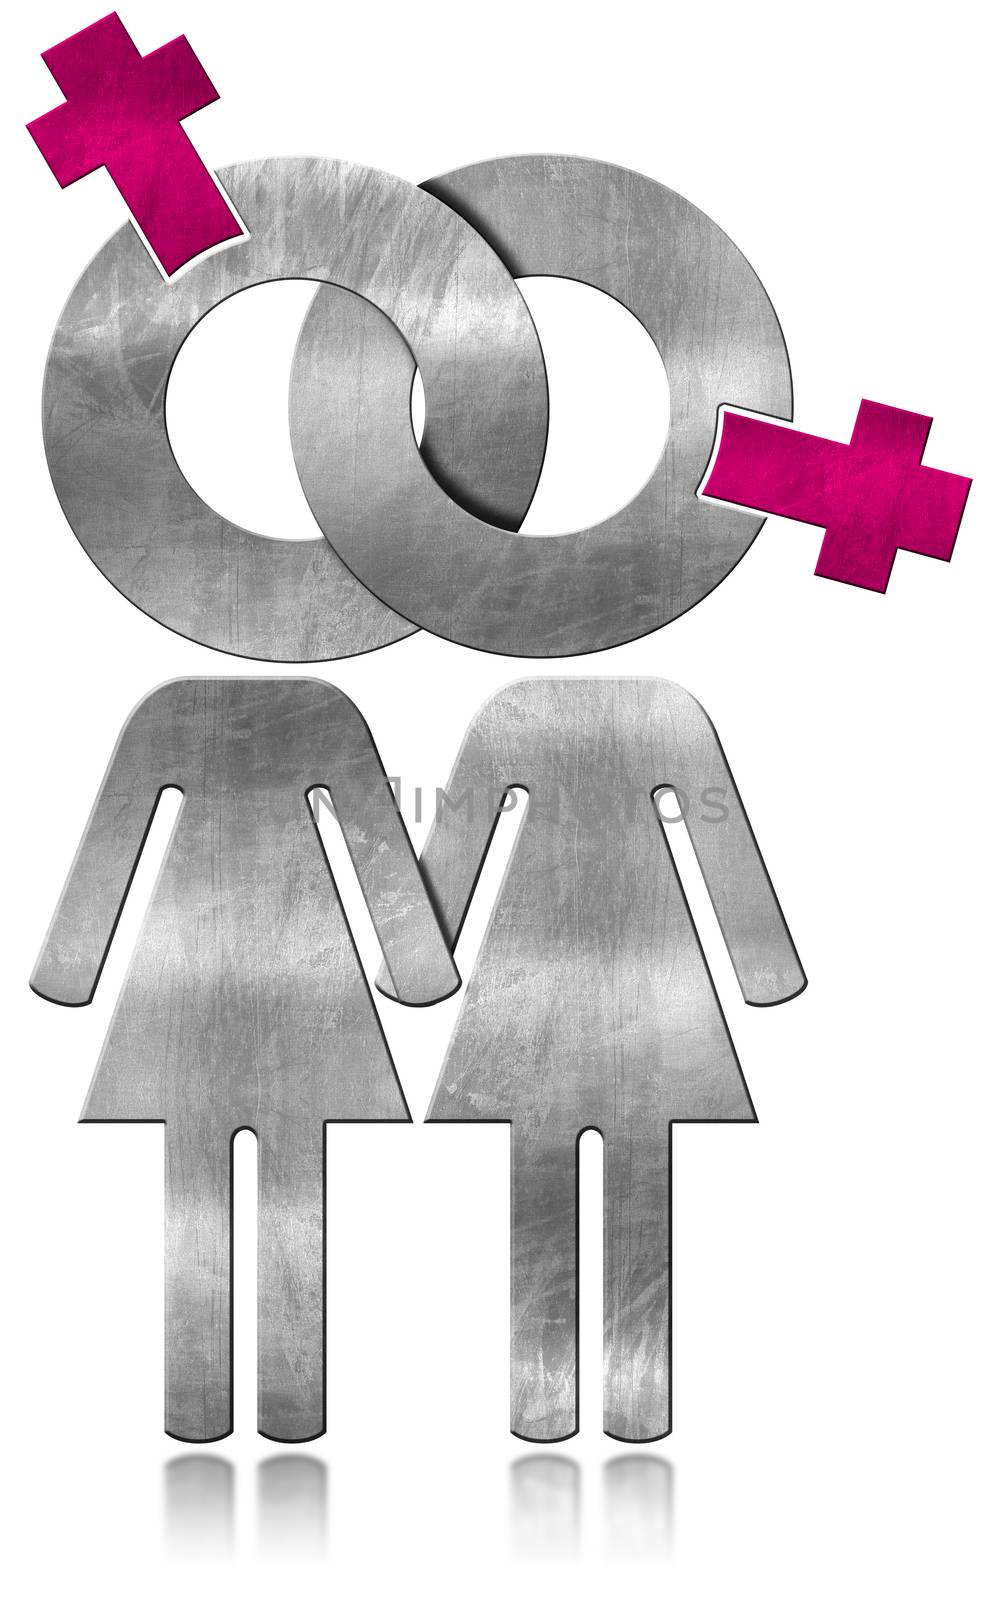 Lesbians Relationship - Metal Symbol by catalby